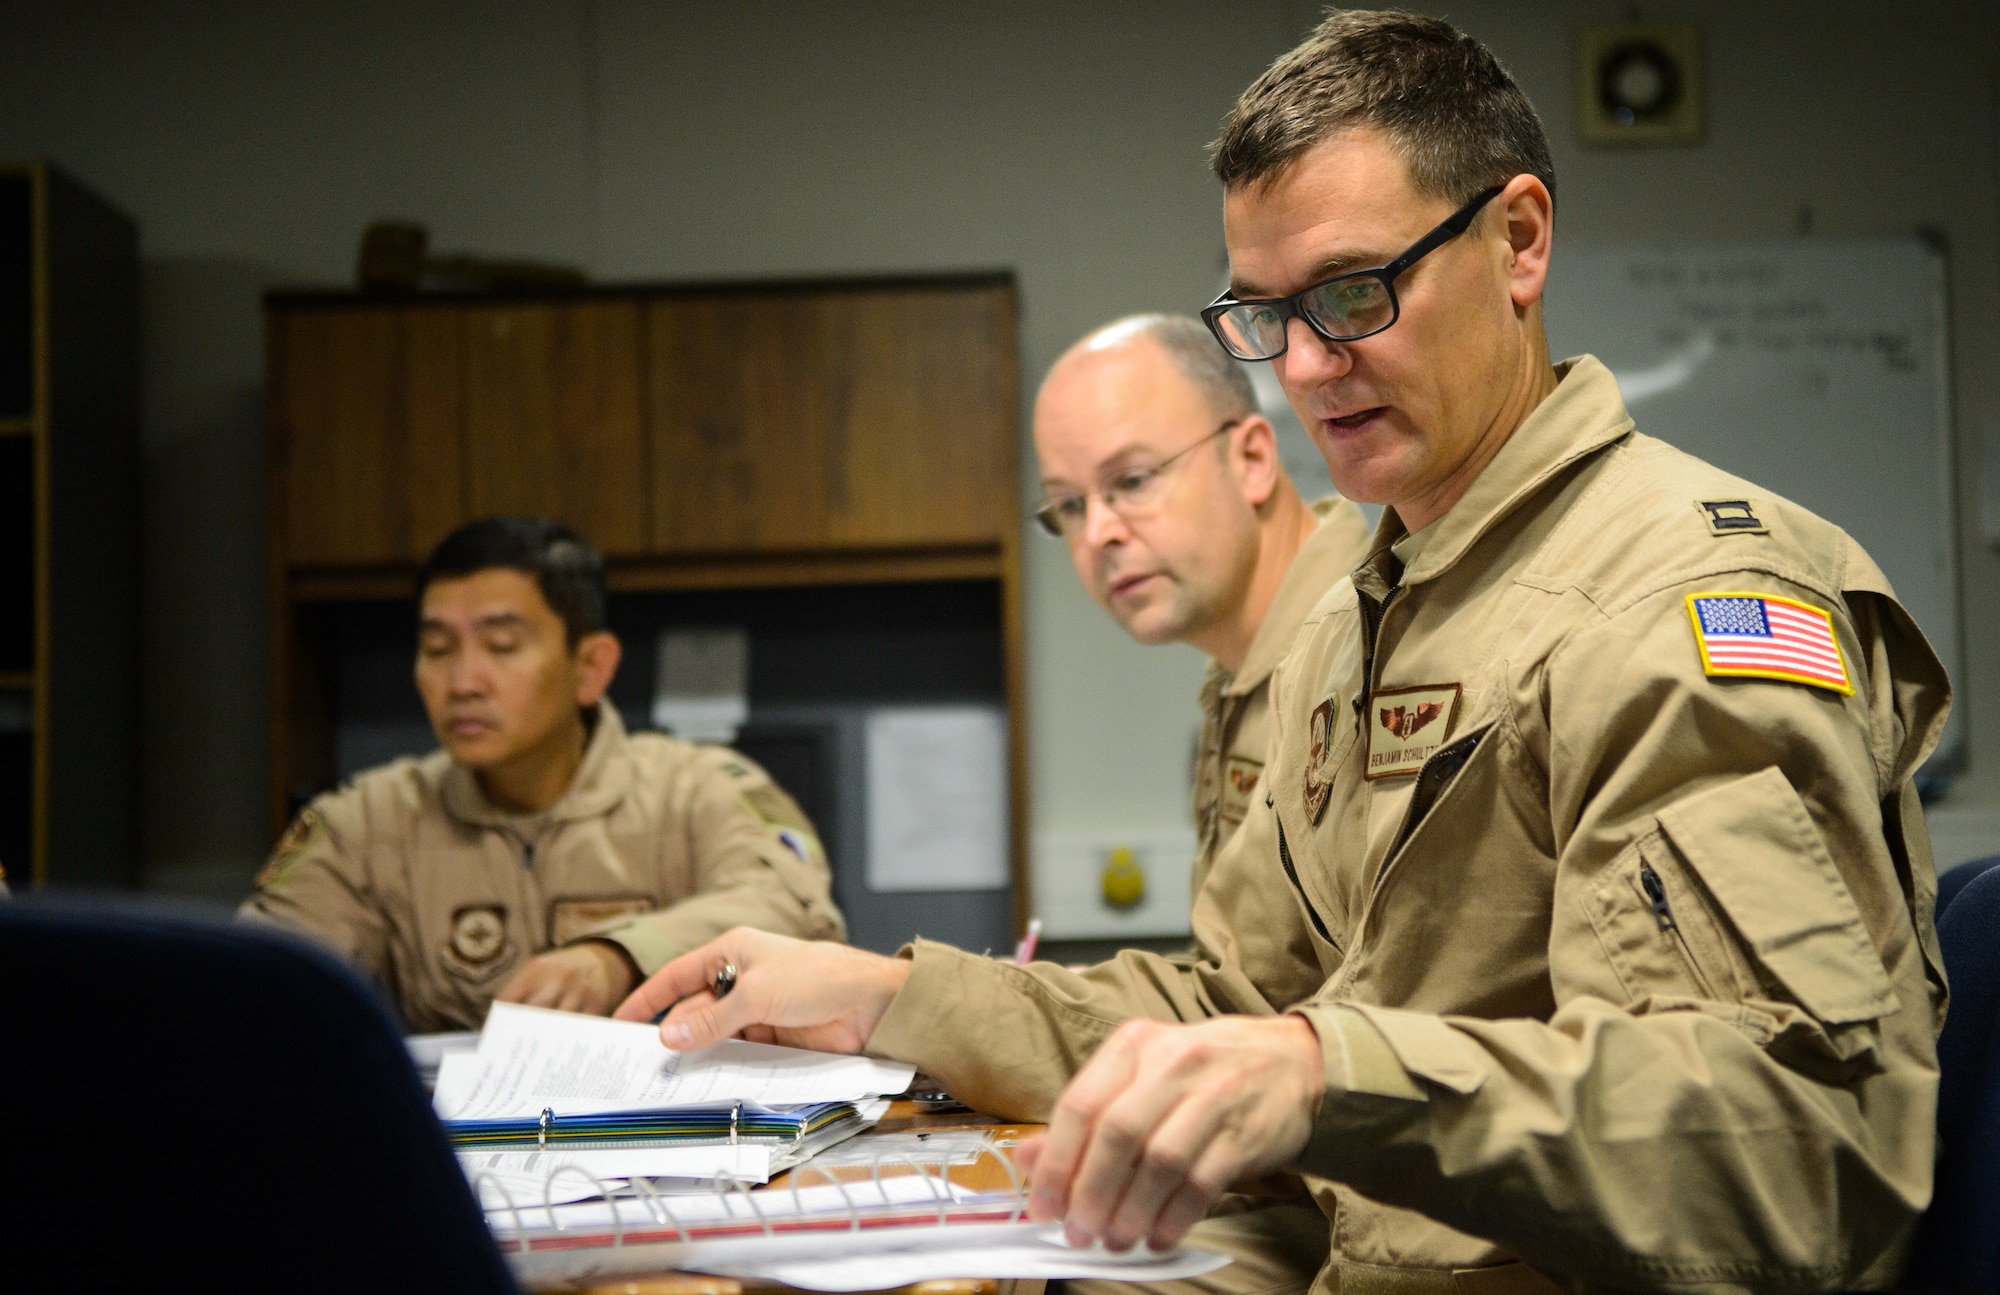 Capt. Benjamin Schultze, right, 10th Expeditionary Aeromedical Evacuation Flight nurse, discusses the flight plan with the medical crew Nov. 10, 2015, at Ramstein Air Base, Germany. The Airmen of the 10th EAEF conducted a flight to evacuate service members in need of medical attention from deployed locations. (U.S. Air Force photo/Staff Sgt. Armando A. Schwier-Morales)